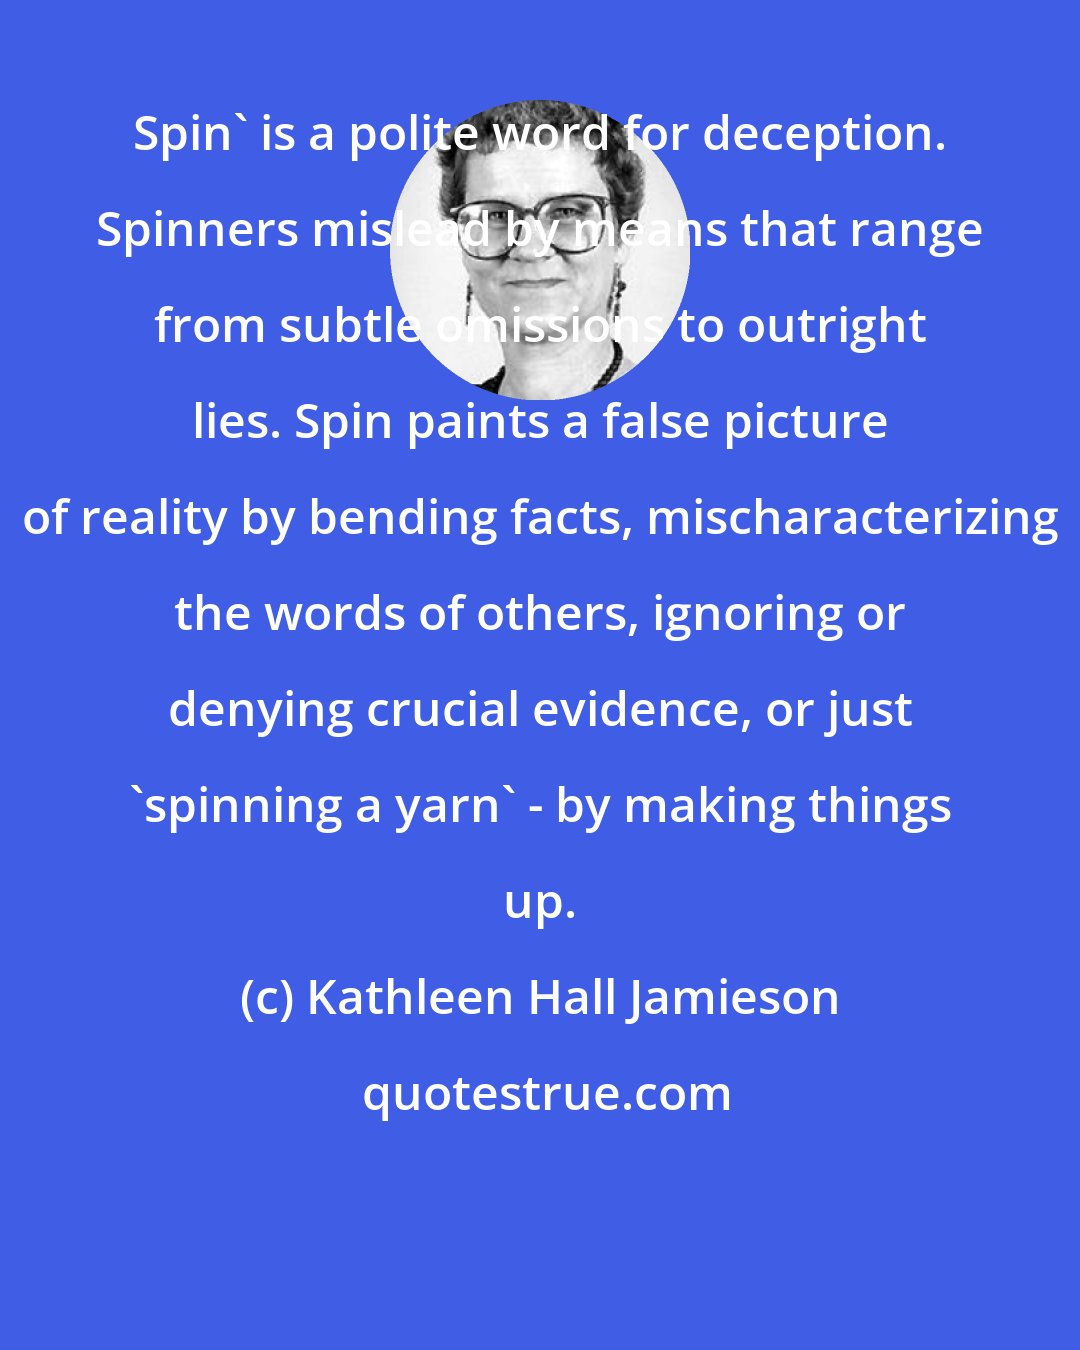 Kathleen Hall Jamieson: Spin' is a polite word for deception. Spinners mislead by means that range from subtle omissions to outright lies. Spin paints a false picture of reality by bending facts, mischaracterizing the words of others, ignoring or denying crucial evidence, or just 'spinning a yarn' - by making things up.